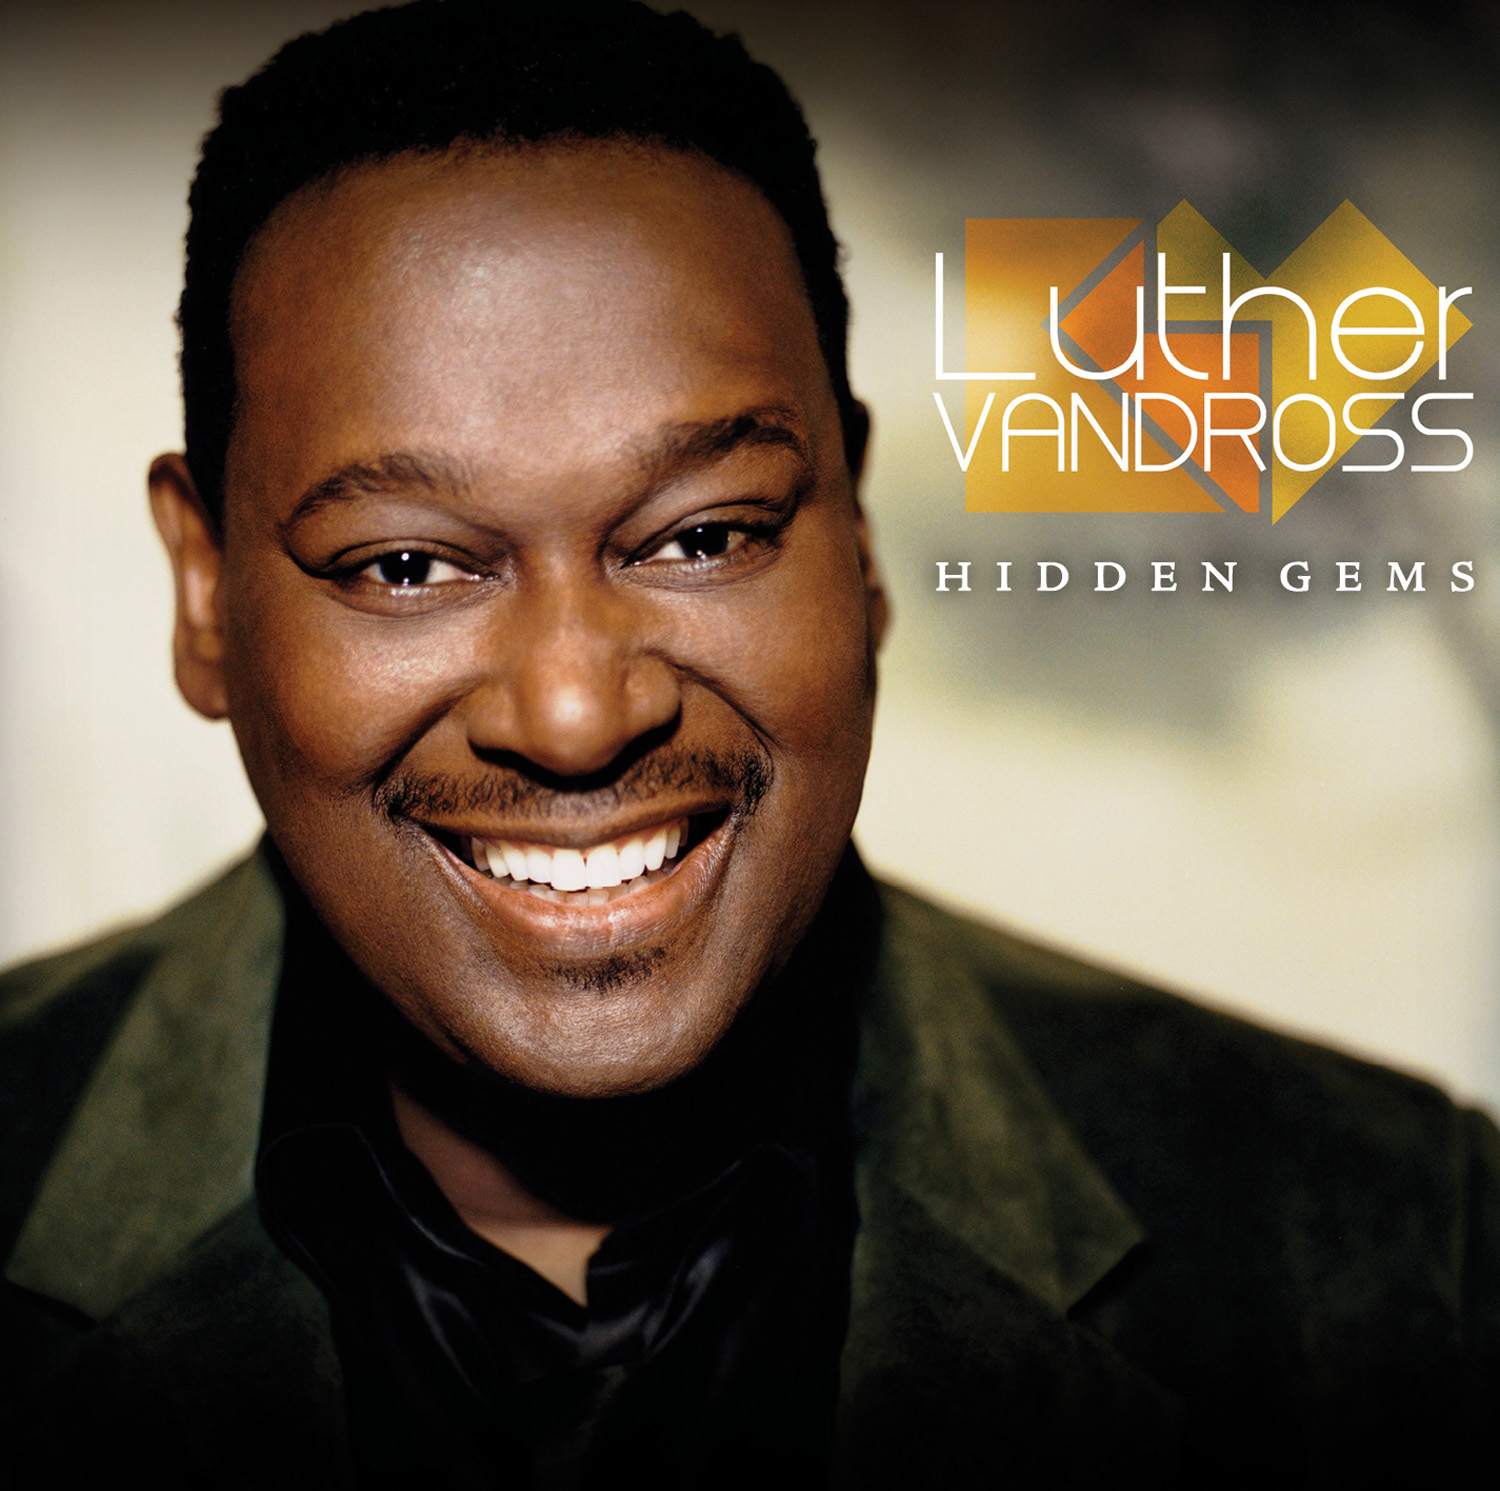 Amazing Luther Vandross Pictures & Backgrounds. 